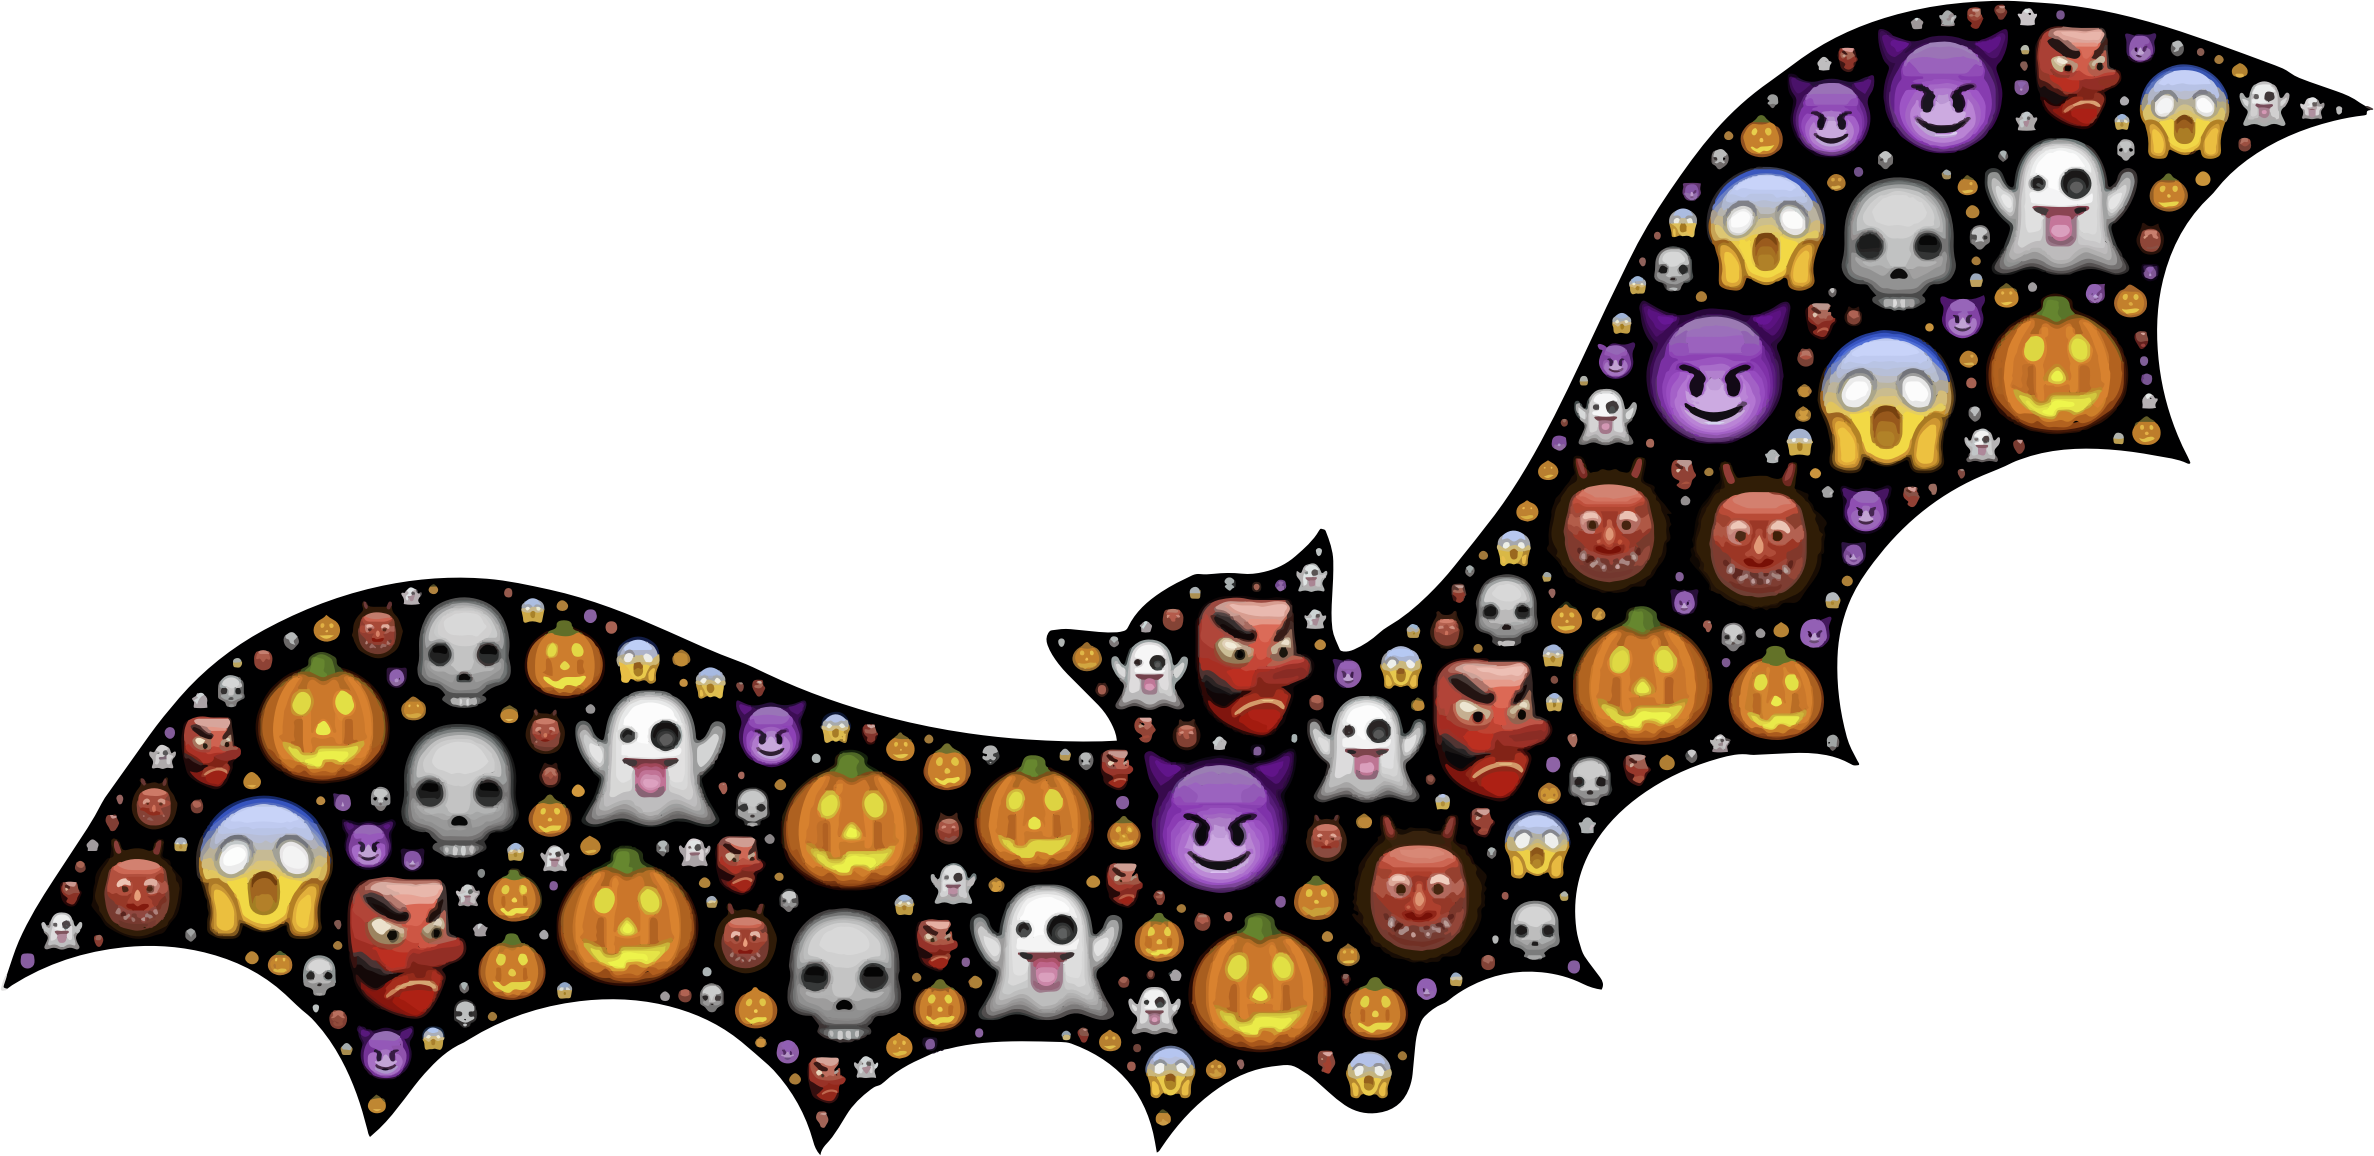 This Free Icons Png Design Of Colorful Halloween